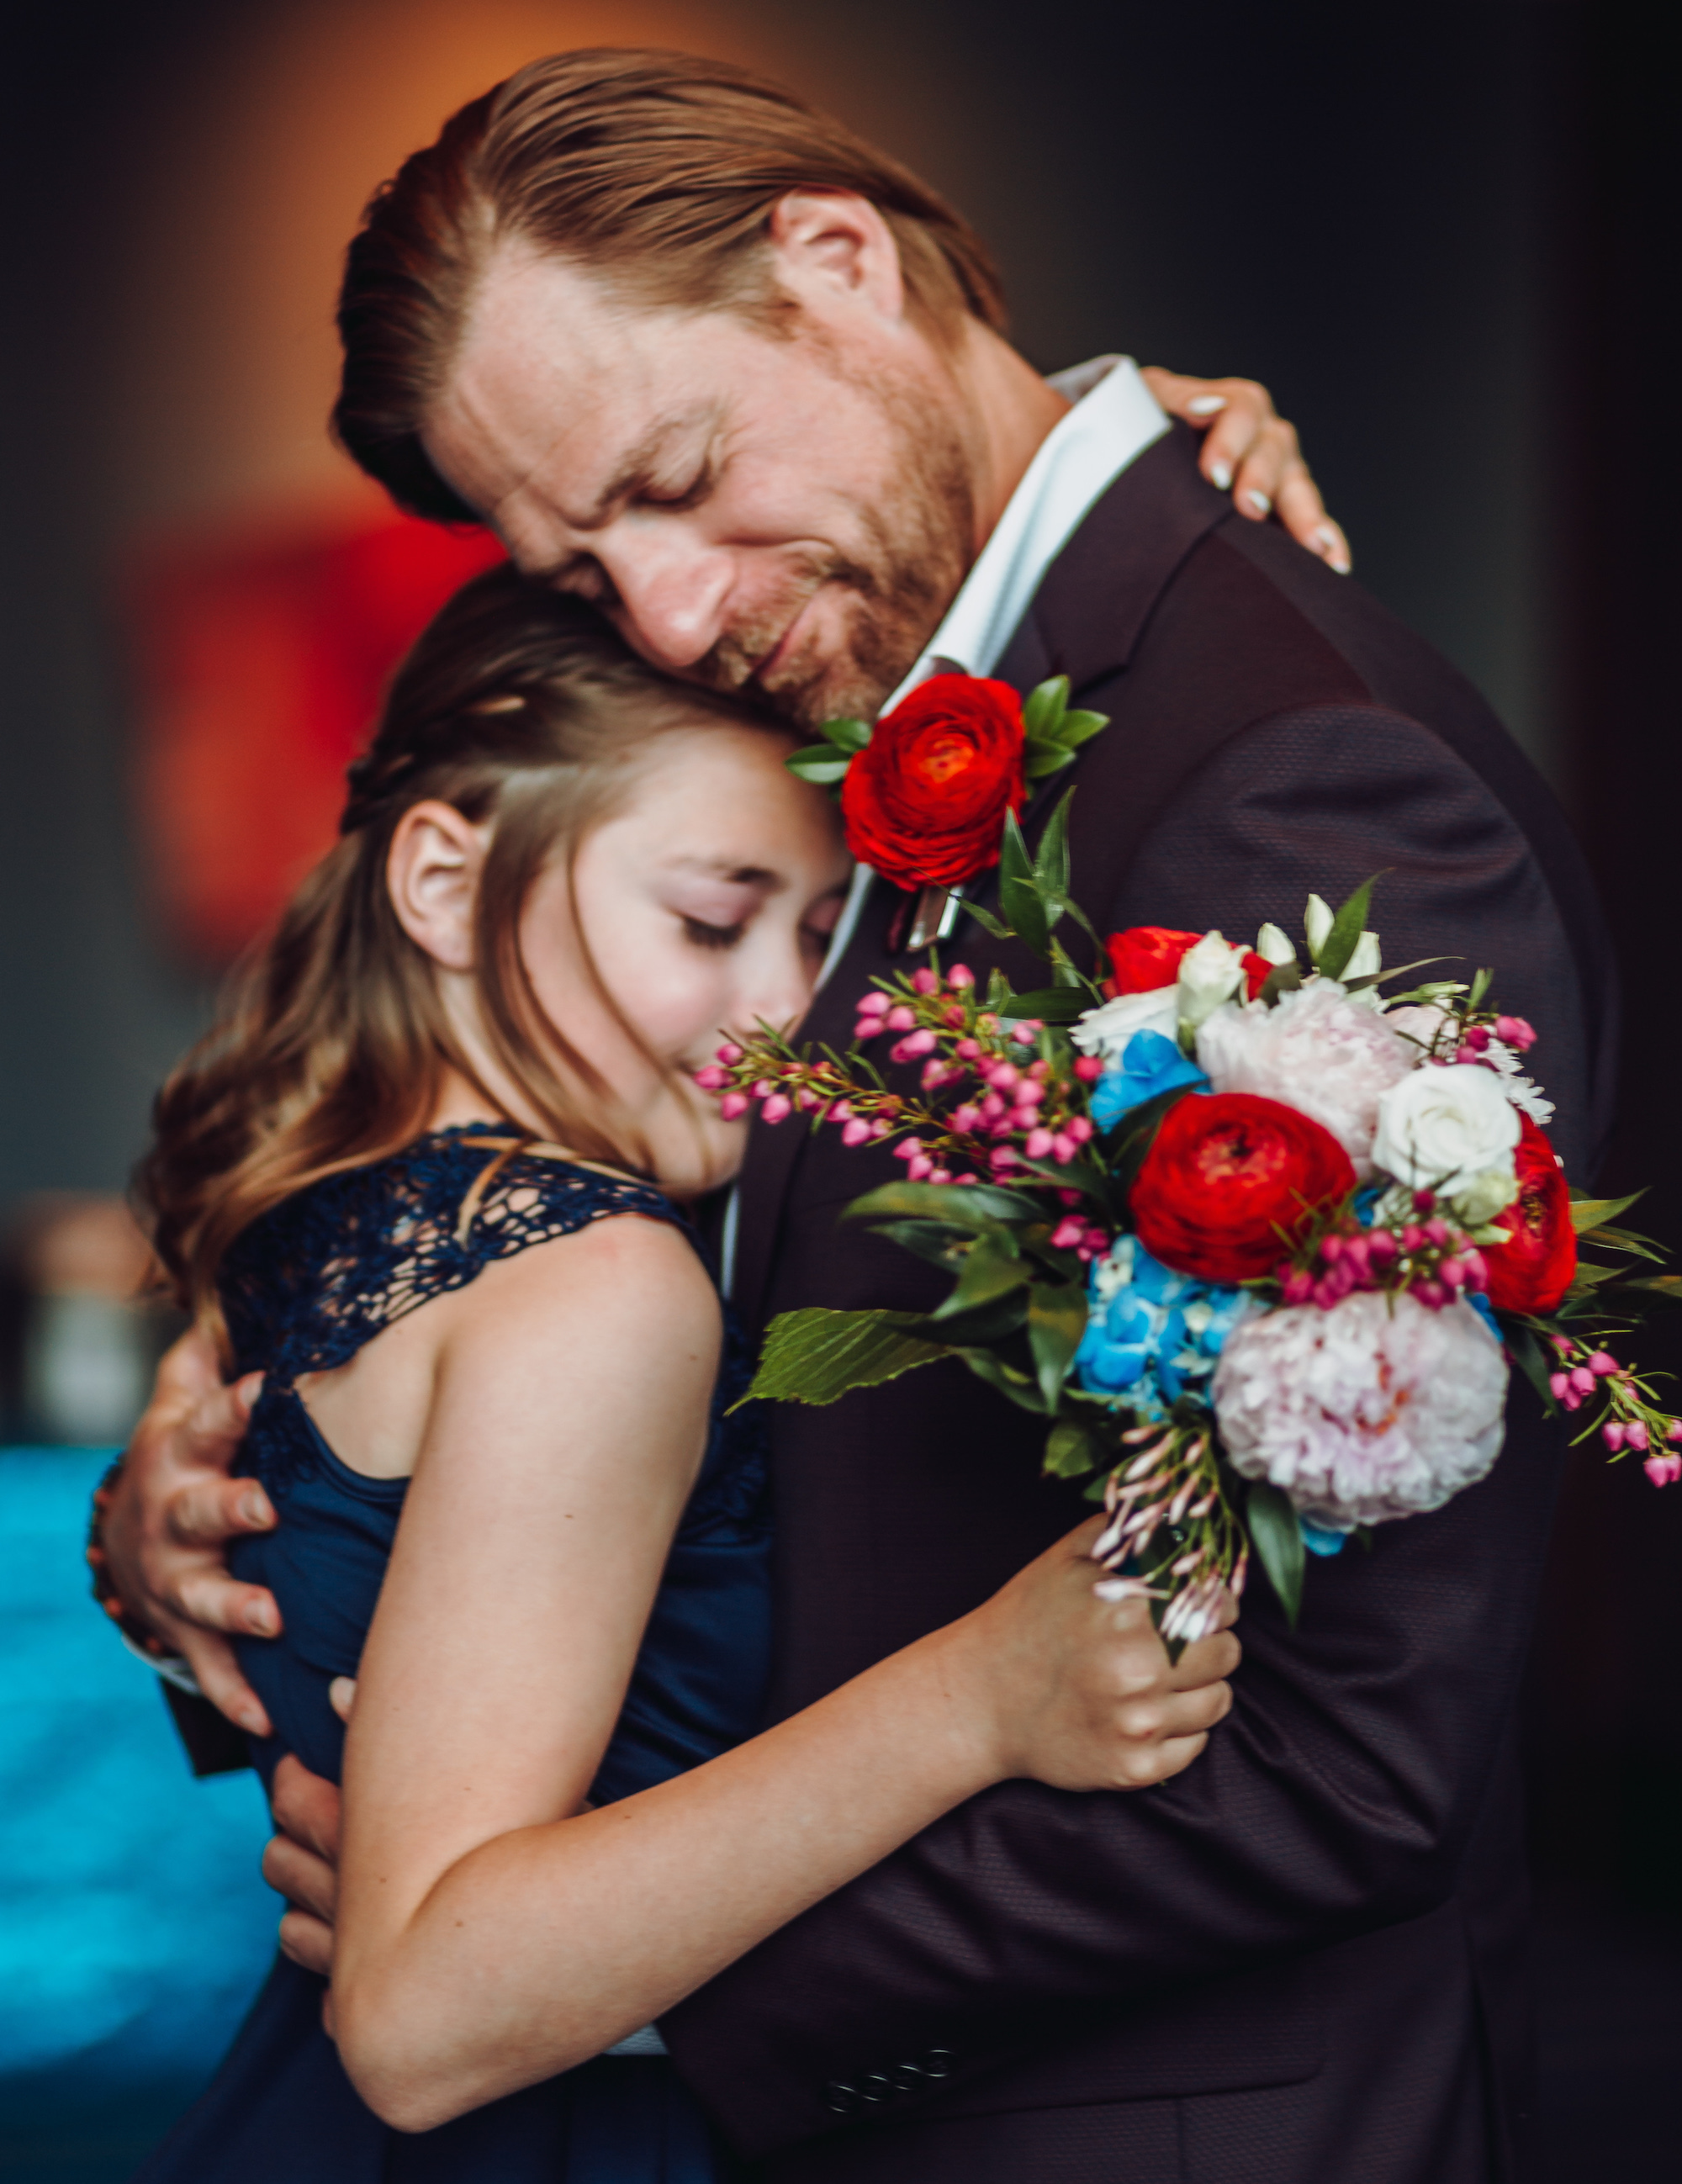 A groom hugs his daughter before his wedding ceremony. She is holding a colorful bouquet full of red, blue and peach flowers.